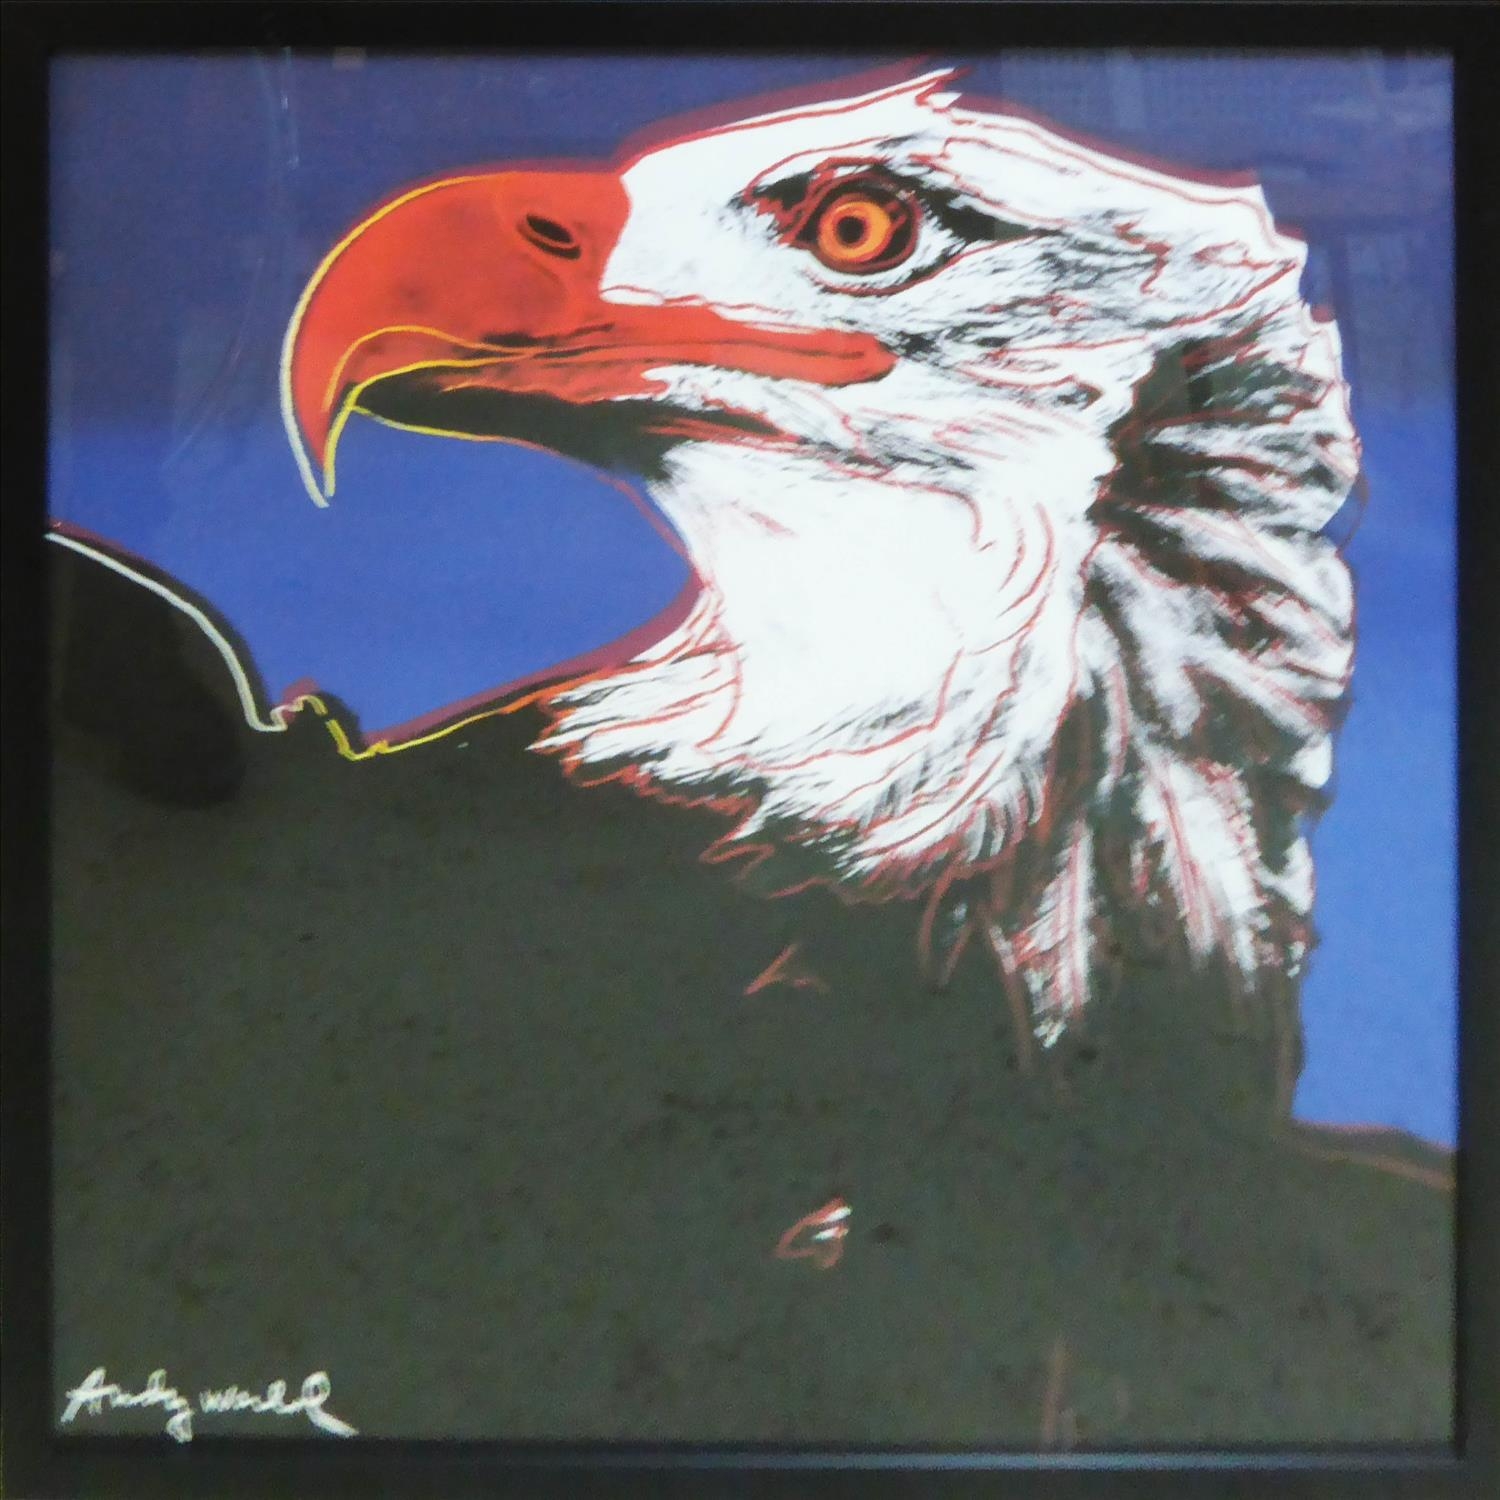 ANDY WARHOL 'Bald Eagle', from Endangered Species portfolio, 1983, lithograph, numbered 101/2400